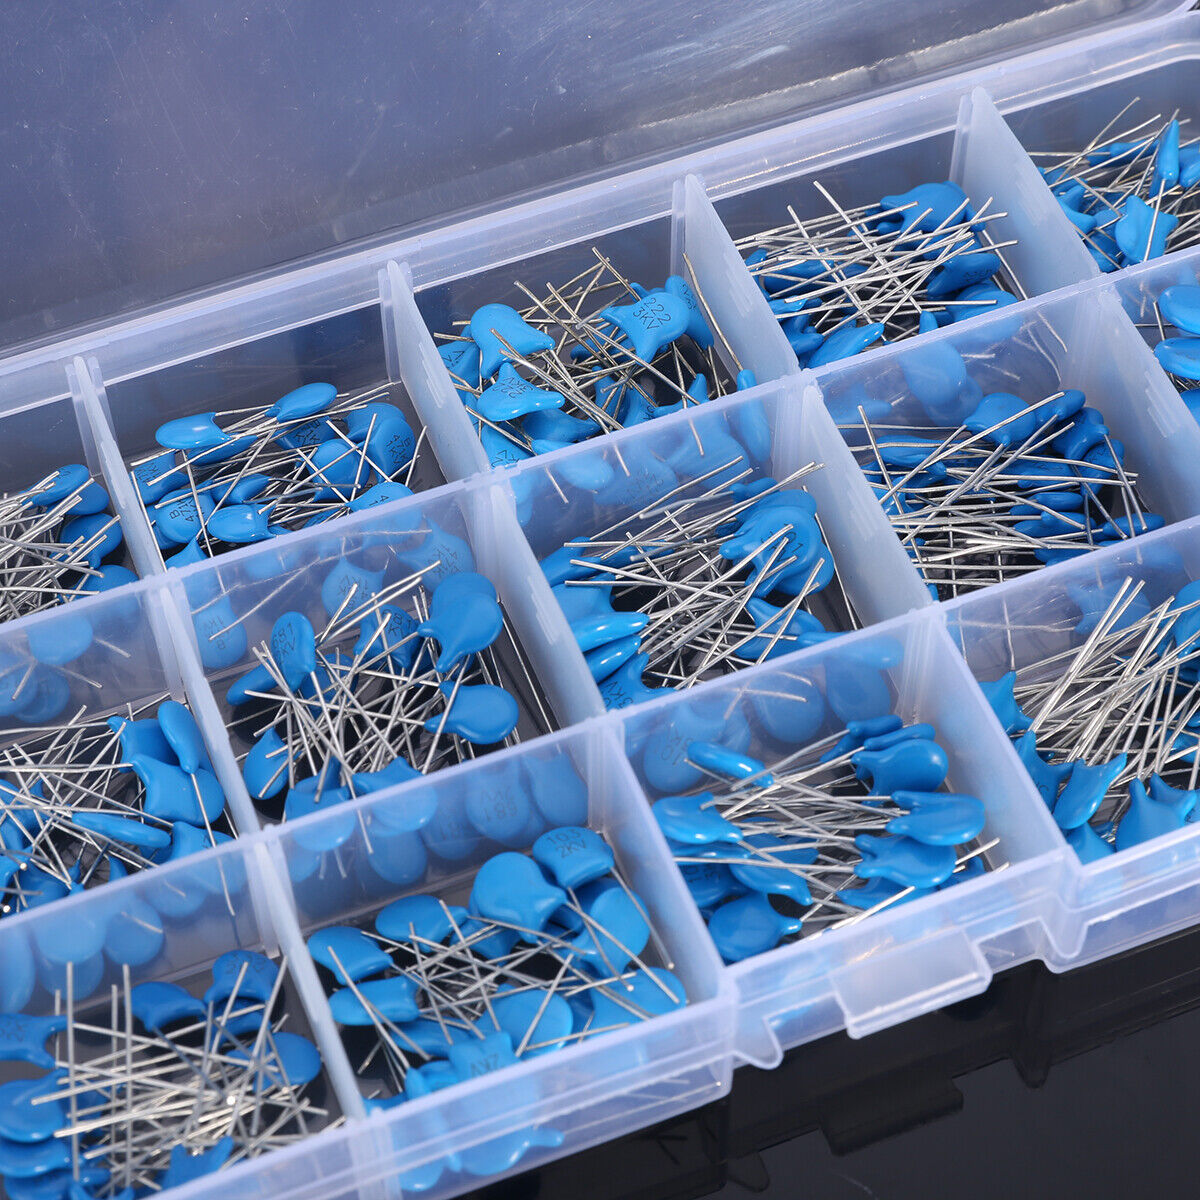 300pcs 15 Value High Voltage Ceramic Capacitors Kit 1nF-22nF Assorted with Box